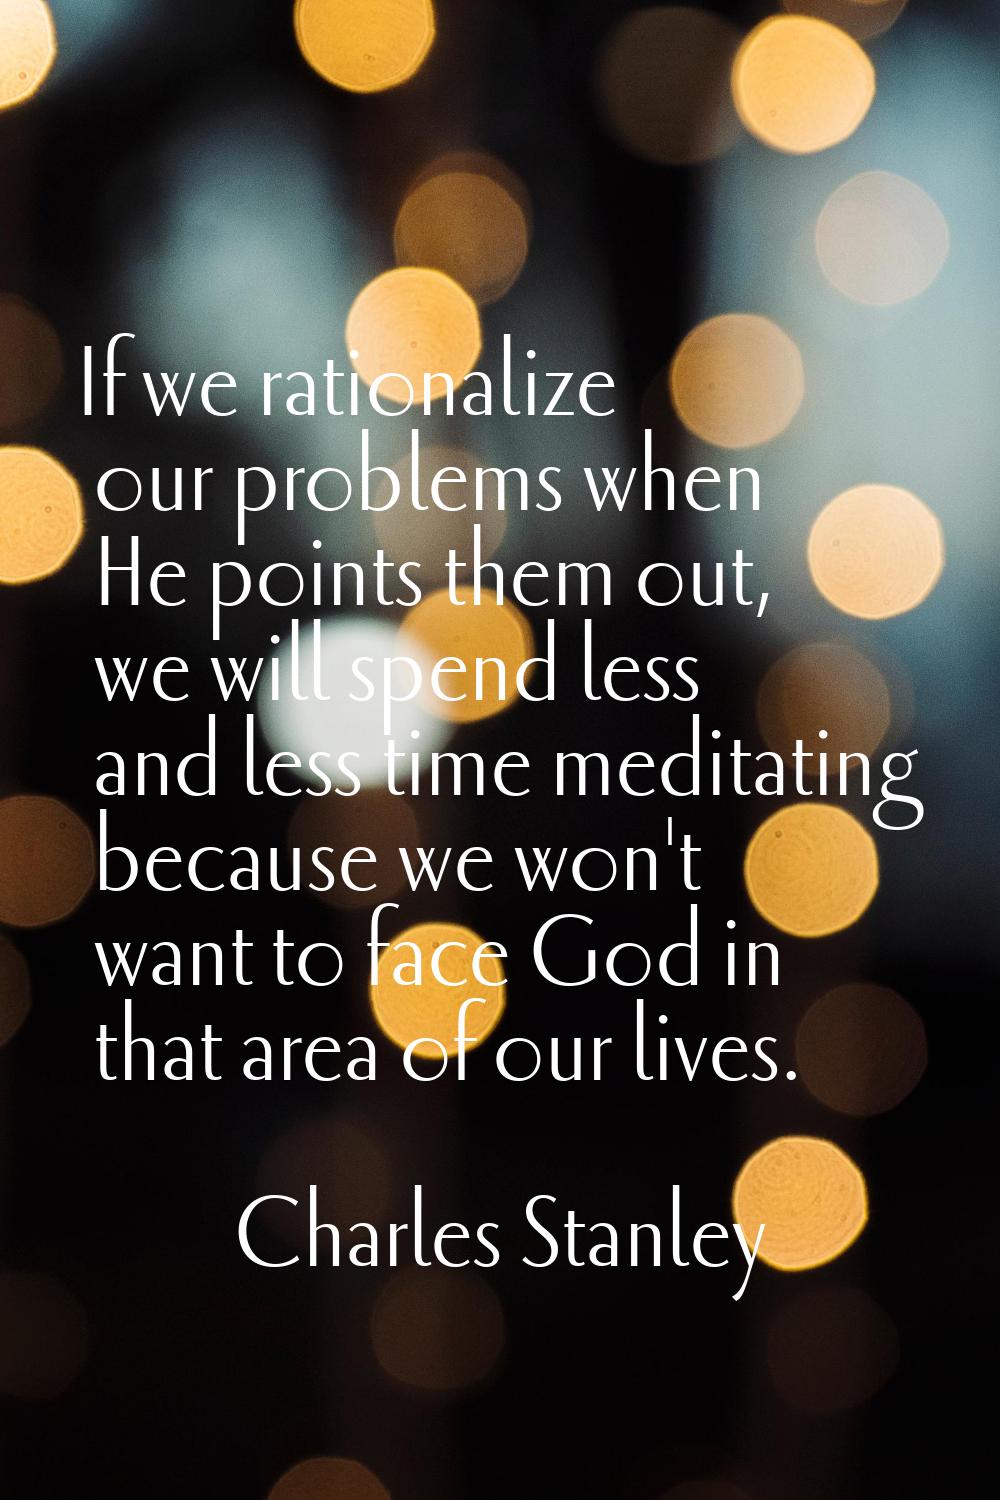 If we rationalize our problems when He points them out, we will spend less and less time meditating